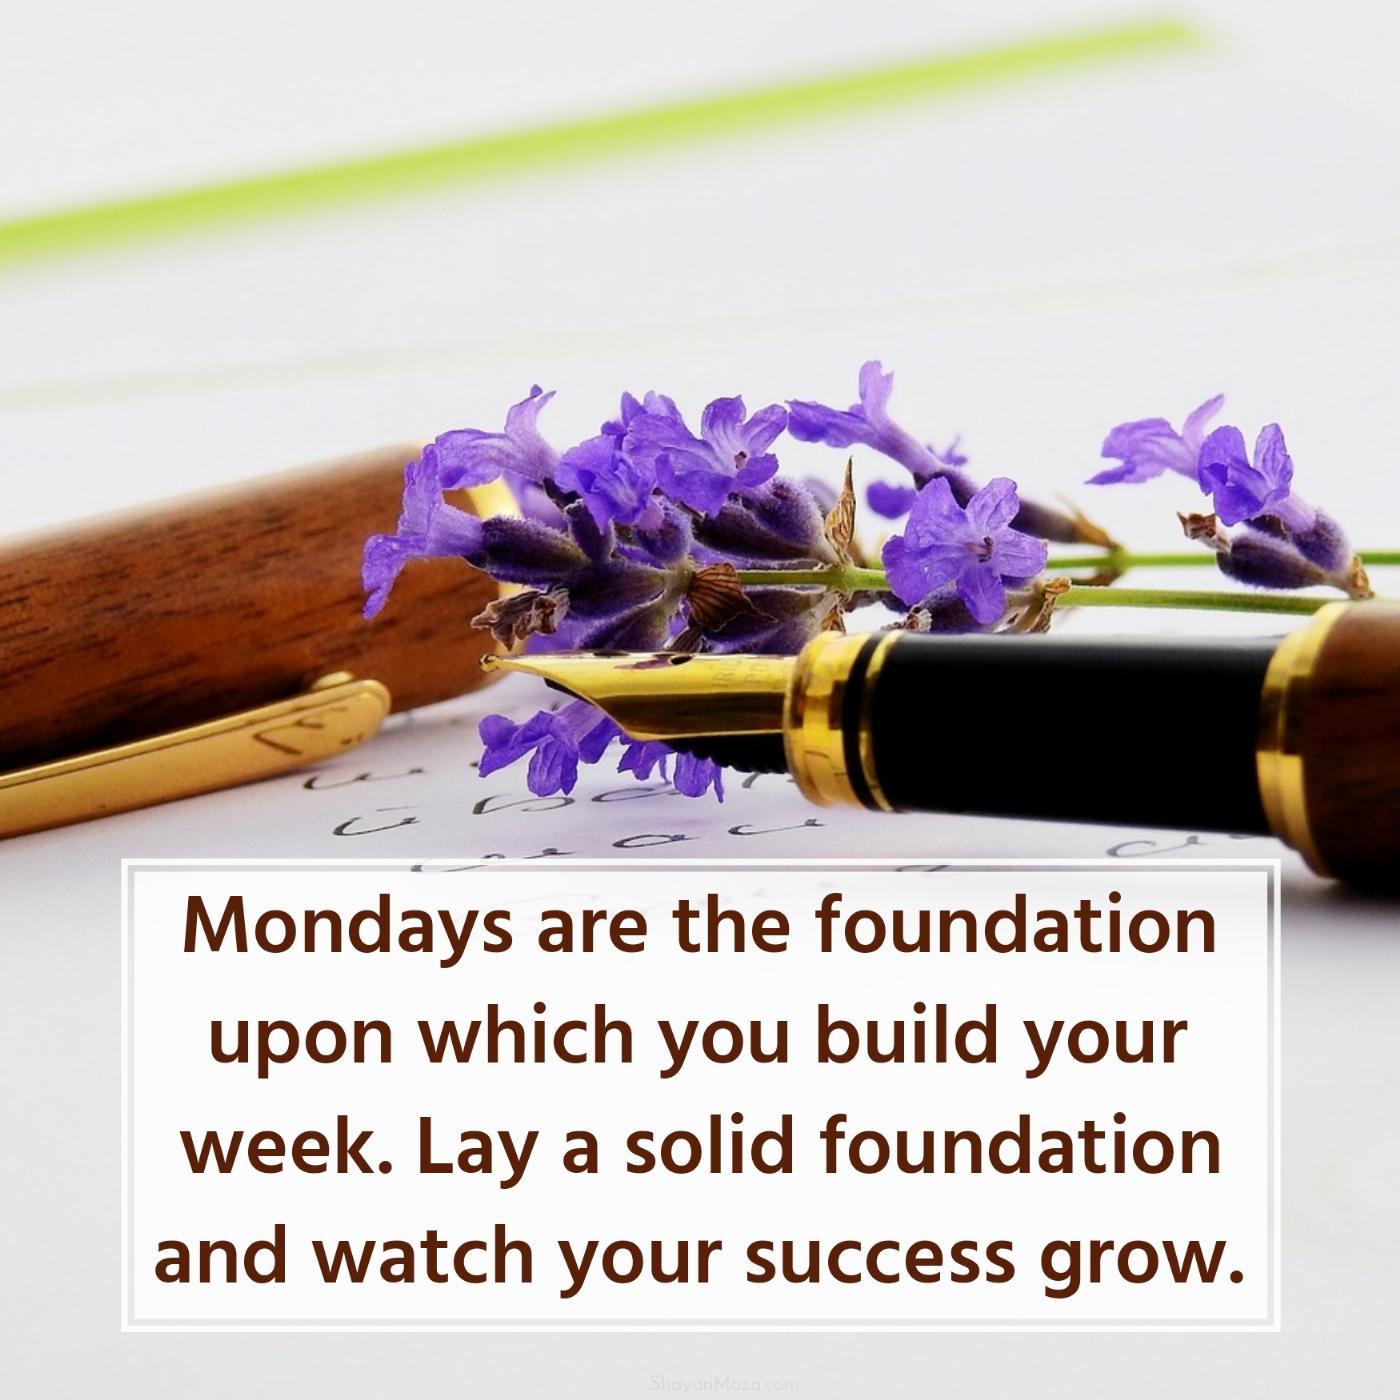 Mondays are the foundation upon which you build your week